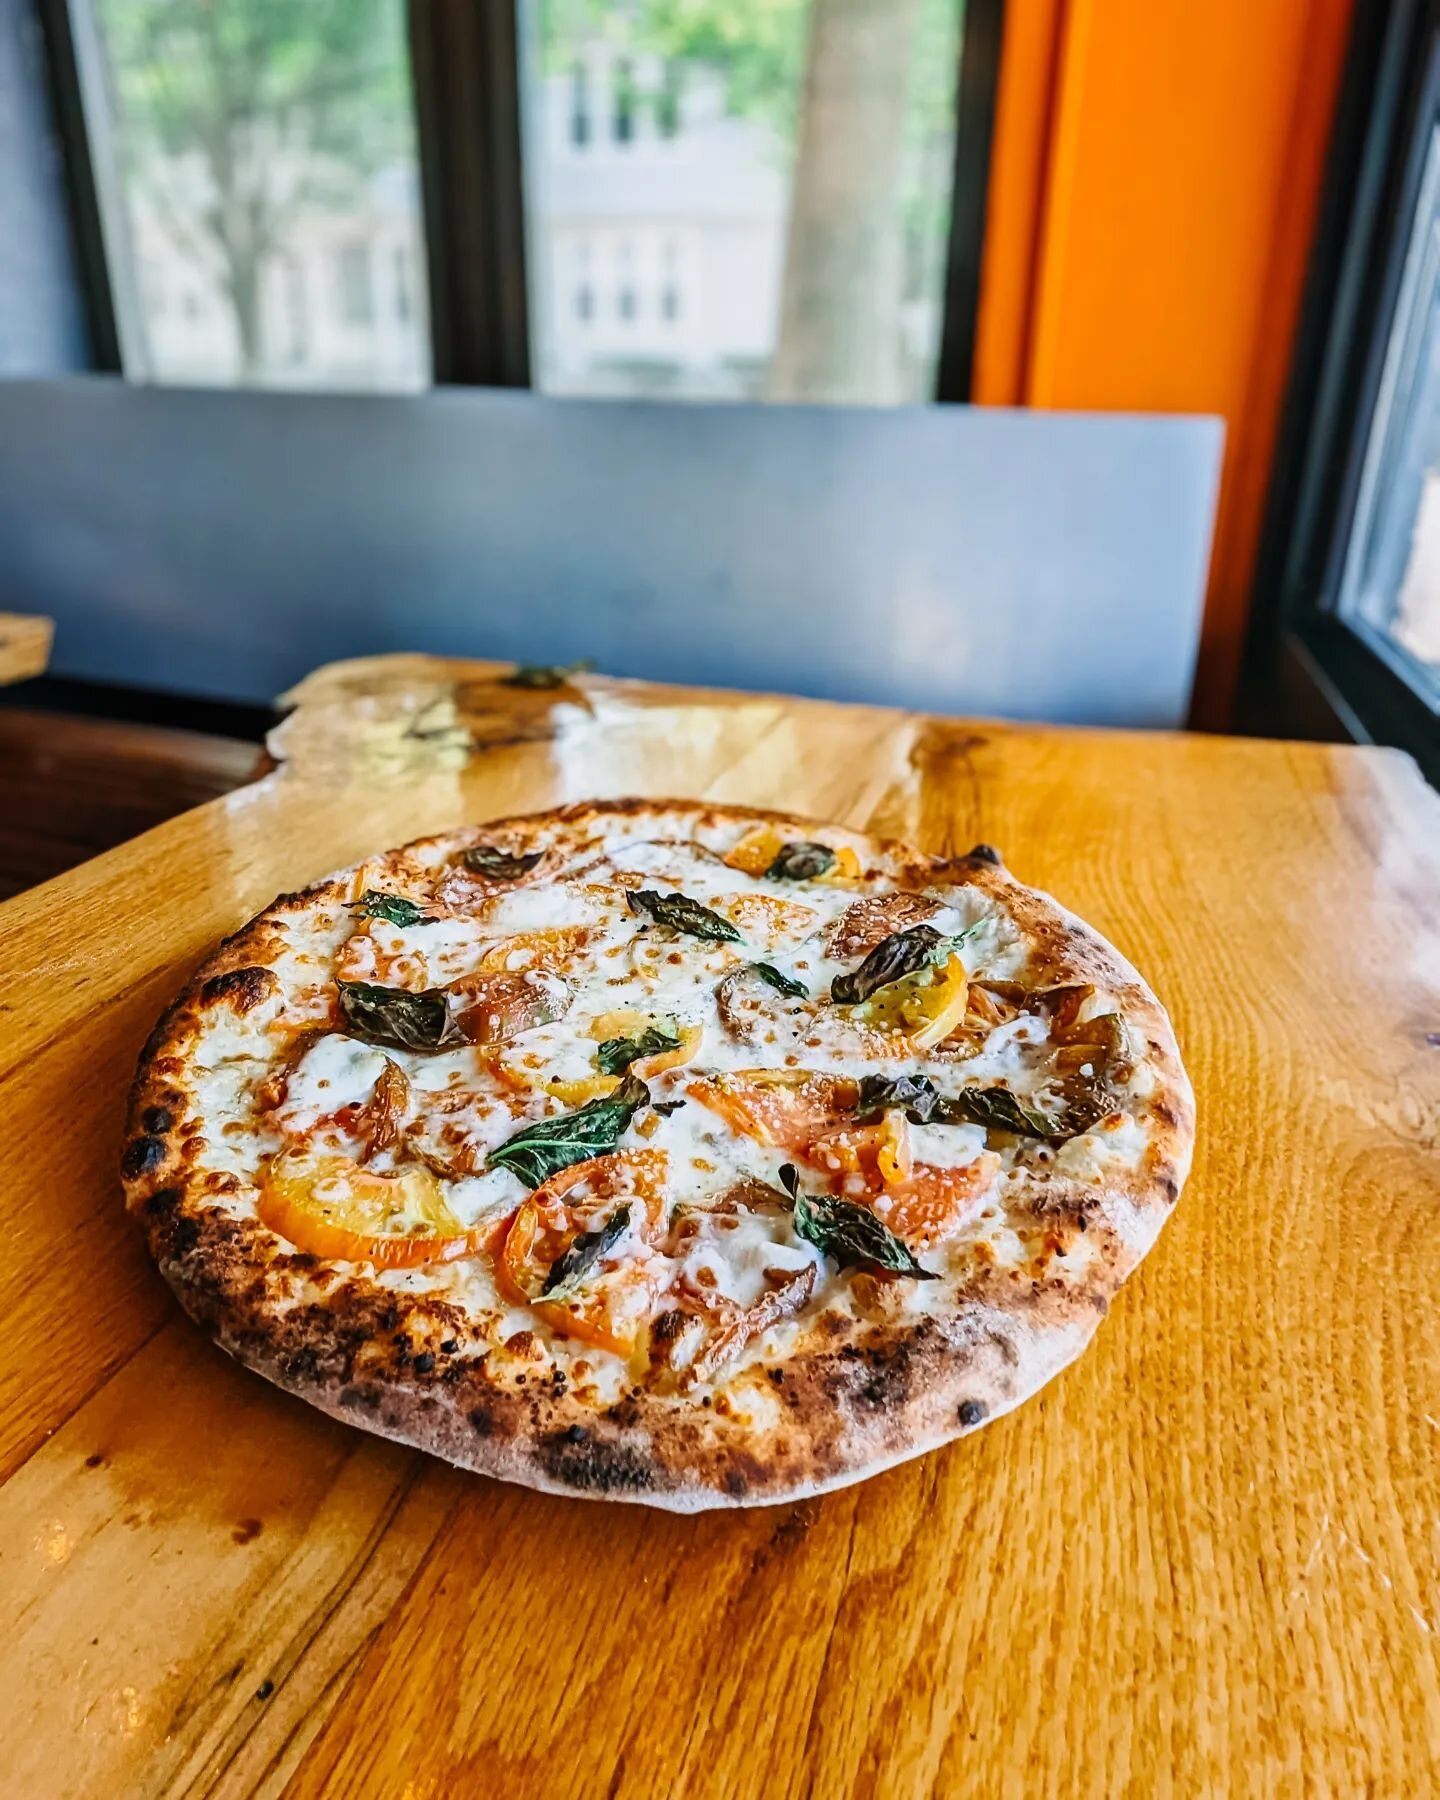 𝘵𝘩𝘦 𝘩𝘦𝘪𝘳𝘭𝘰𝘰𝘮 is back!!
.
.

the seasons are changing and so are our specials!

here is the end of summer lineup ↯
🍅 the heirloom&mdash;
connecticut grown heirloom tomatoes, fresh mozz, fresh garlic, basil &amp; a drizzle of olive oil [ th